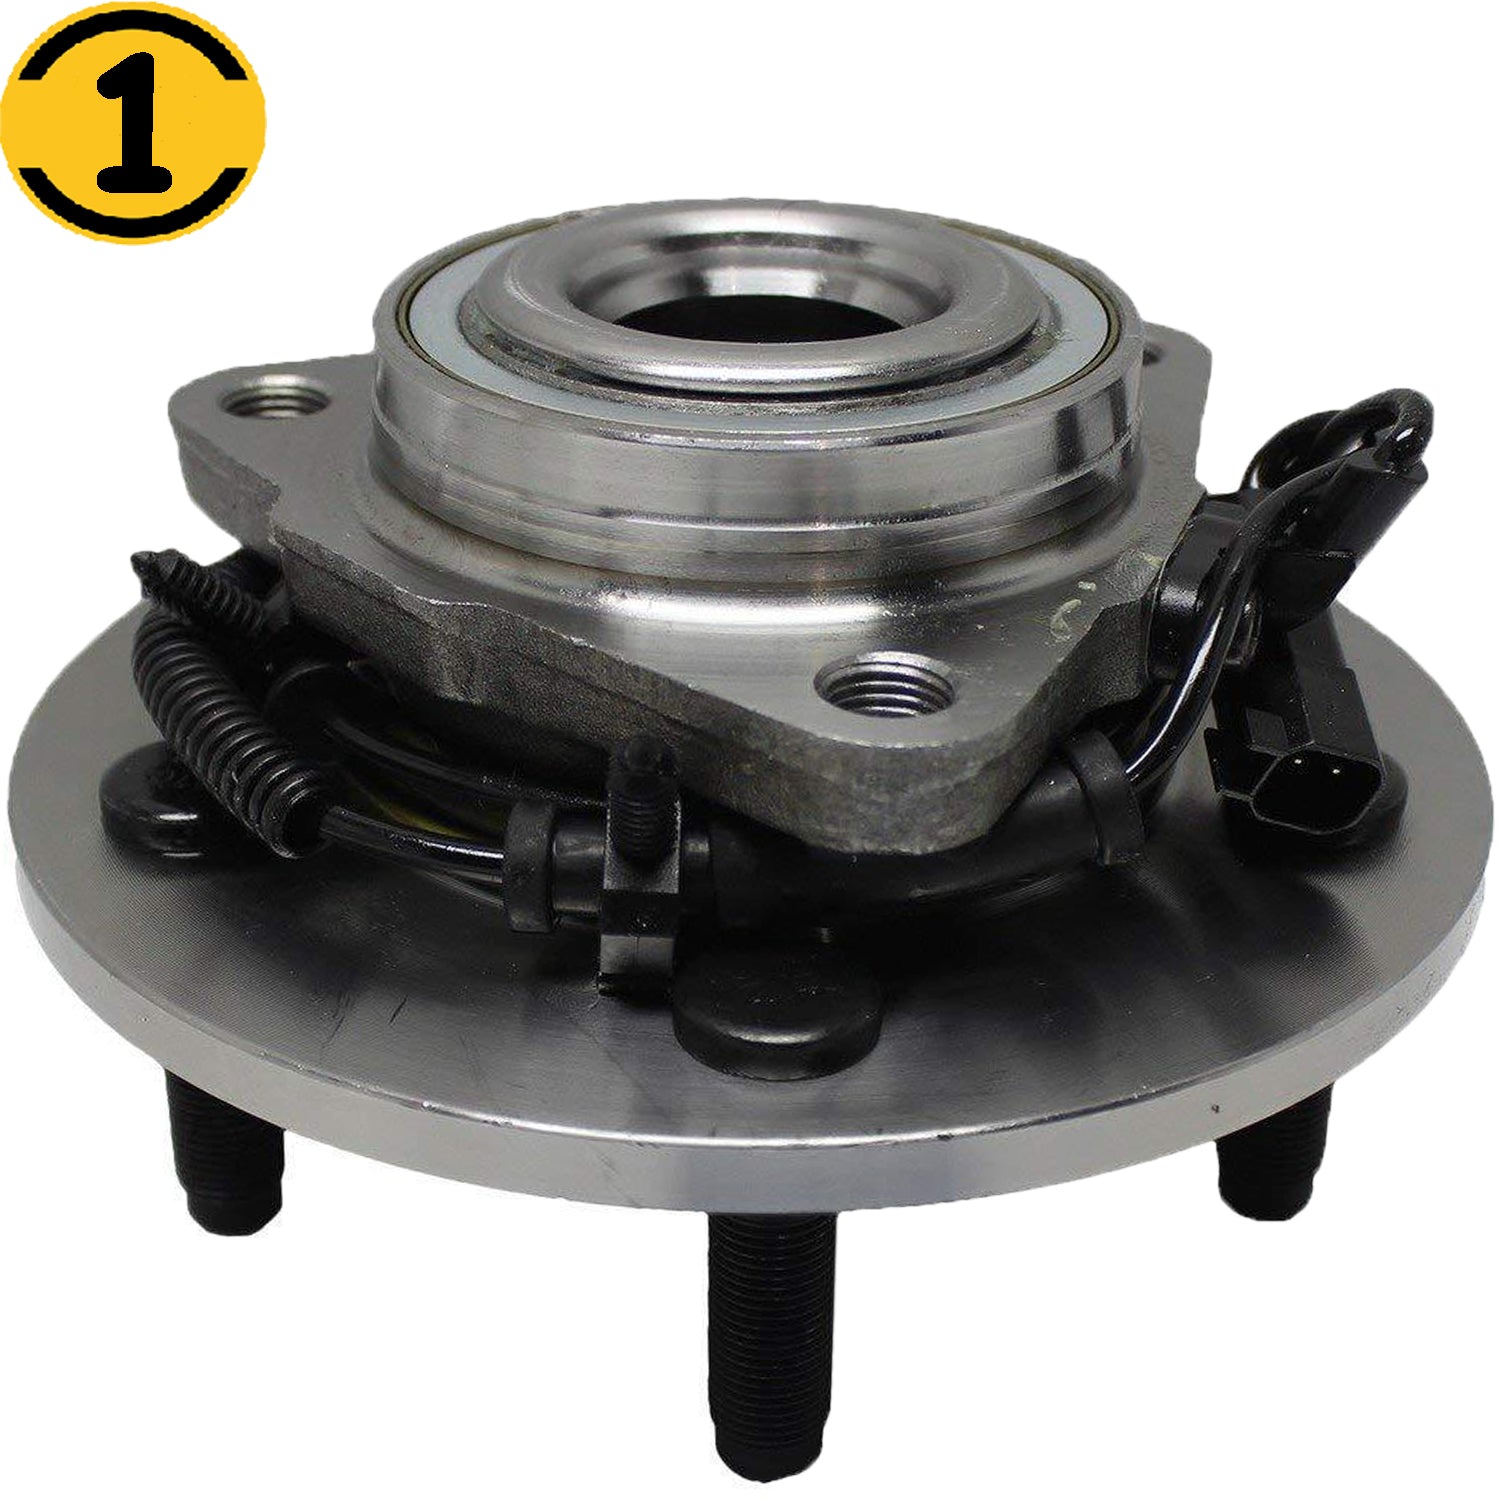 JADODE Front Wheel Hub Bearing Assembly For 2009 2010 2011 Dodge Ram 1500 w/ABS 5 Lugs